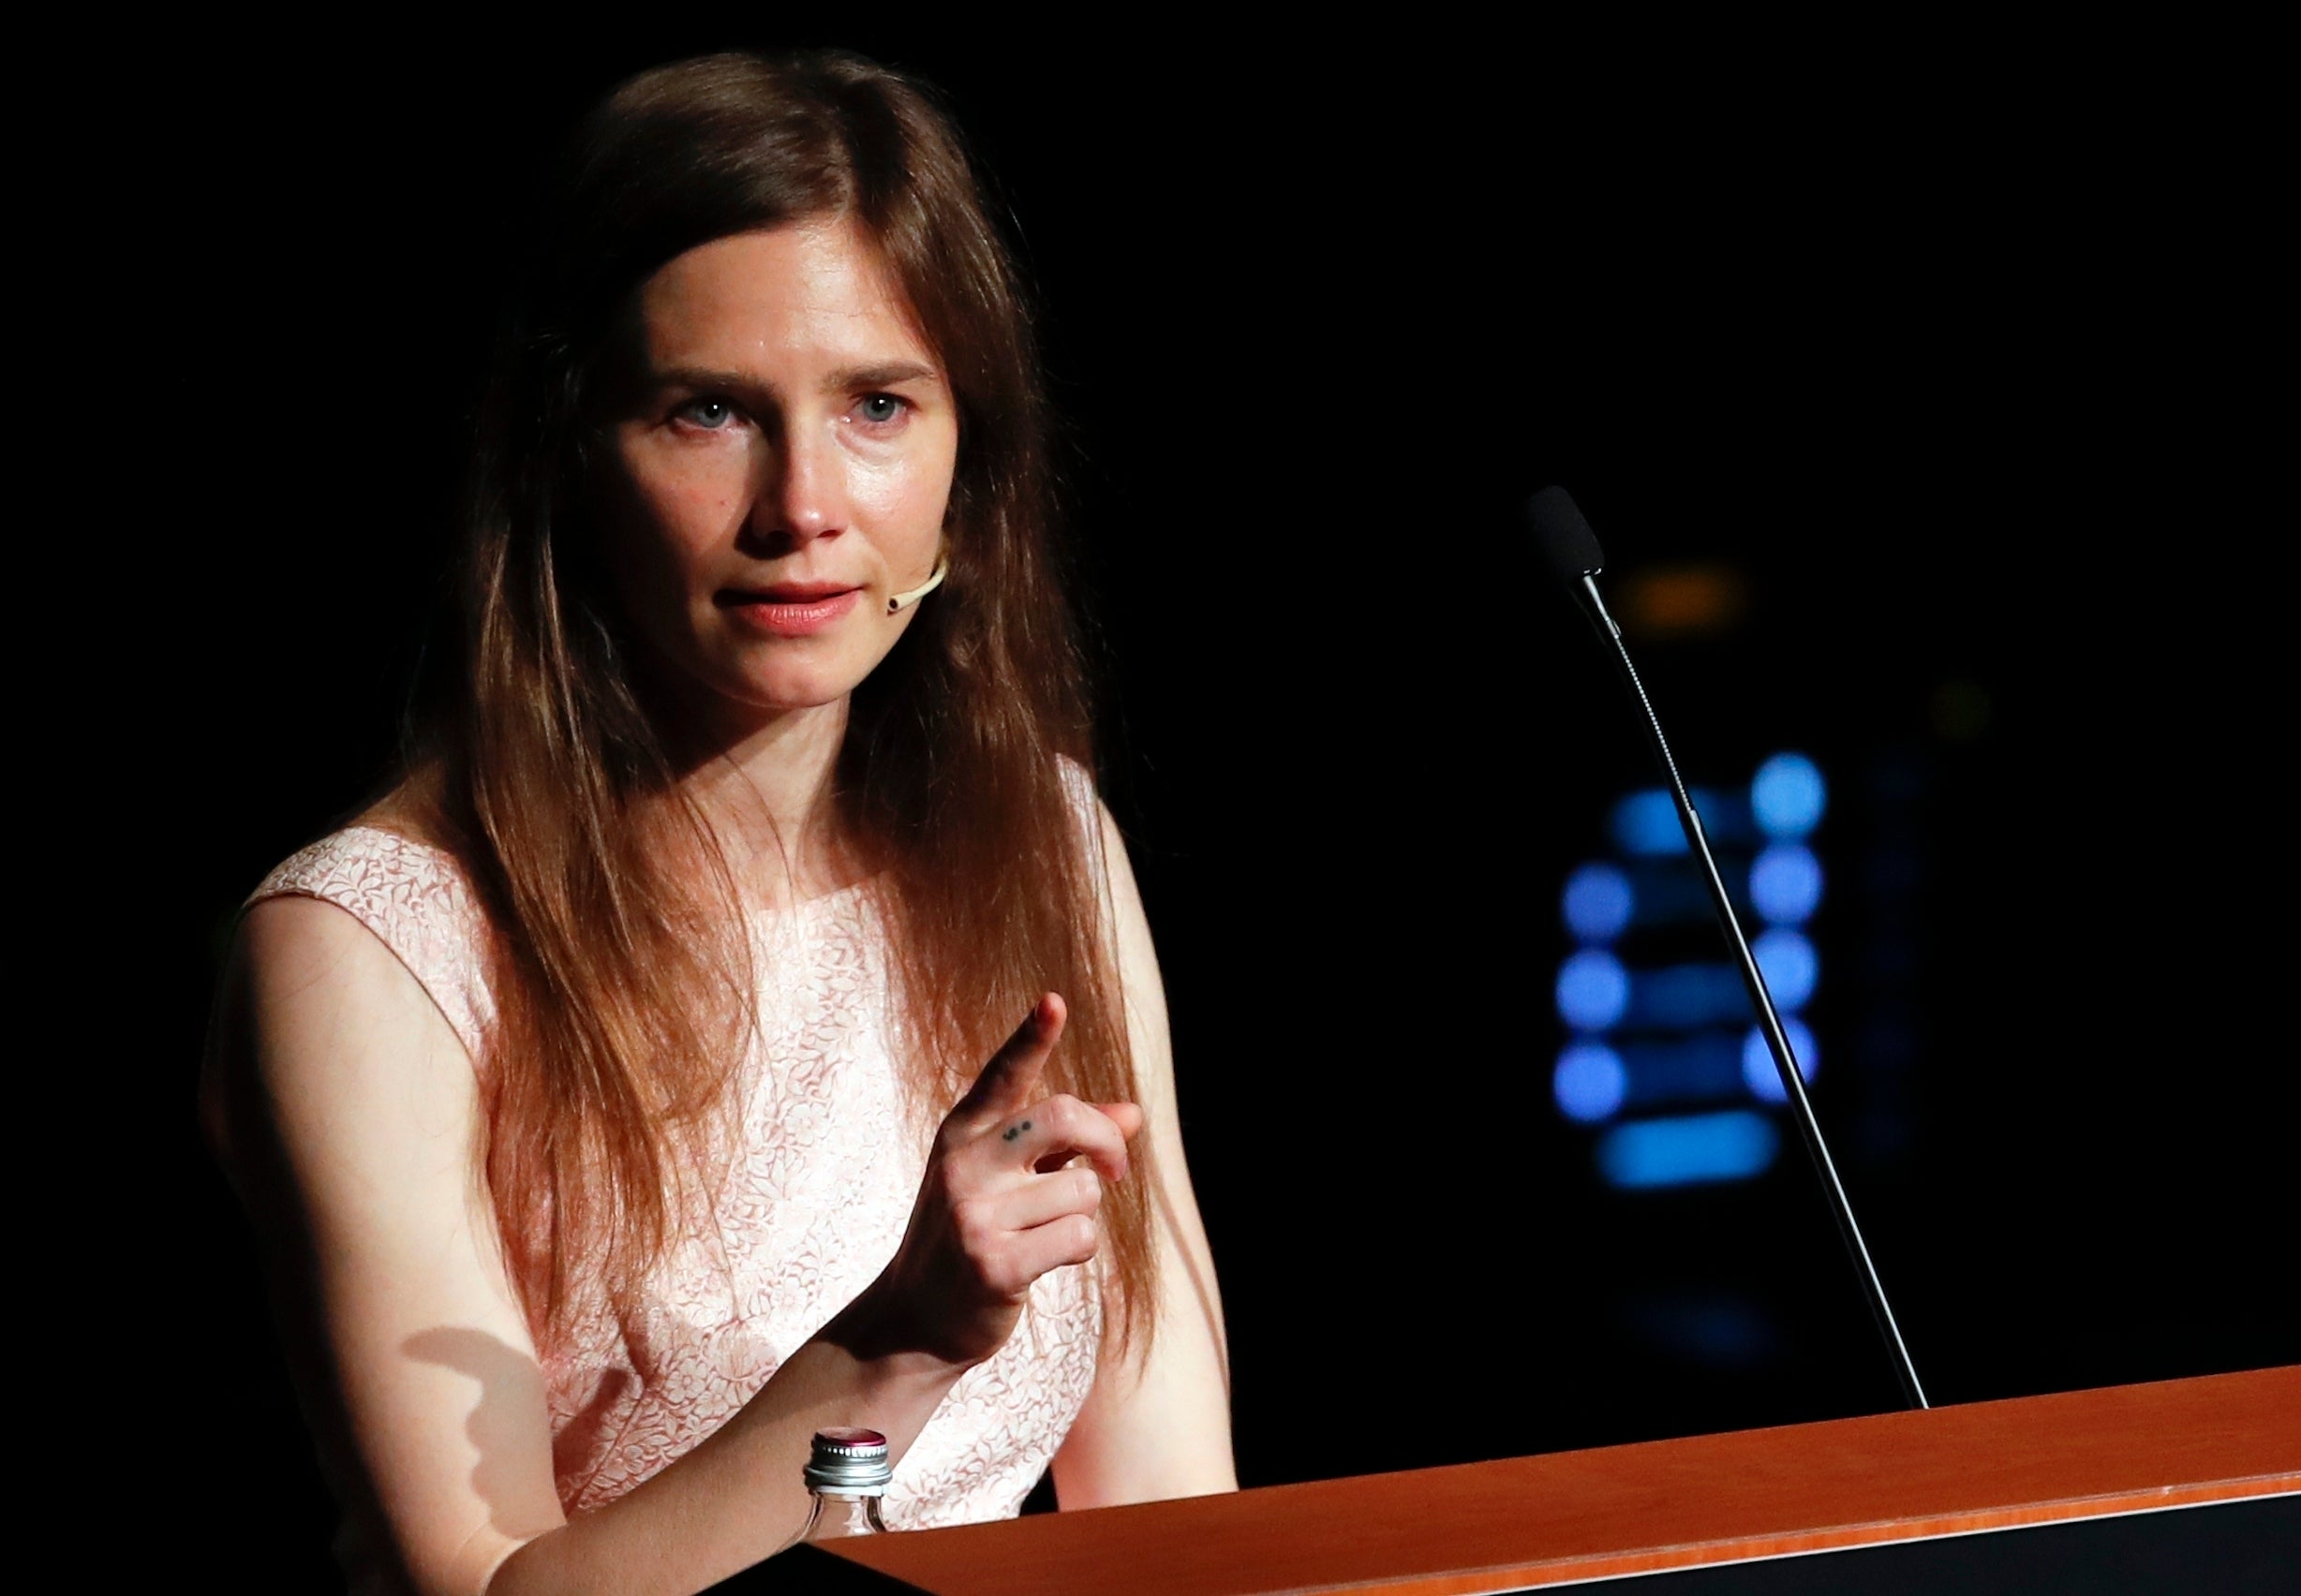 Amanda Knox faces a final trial in Italy before she is fully cleared of all charges stemming from the 2007 murder of Meredith Kercher